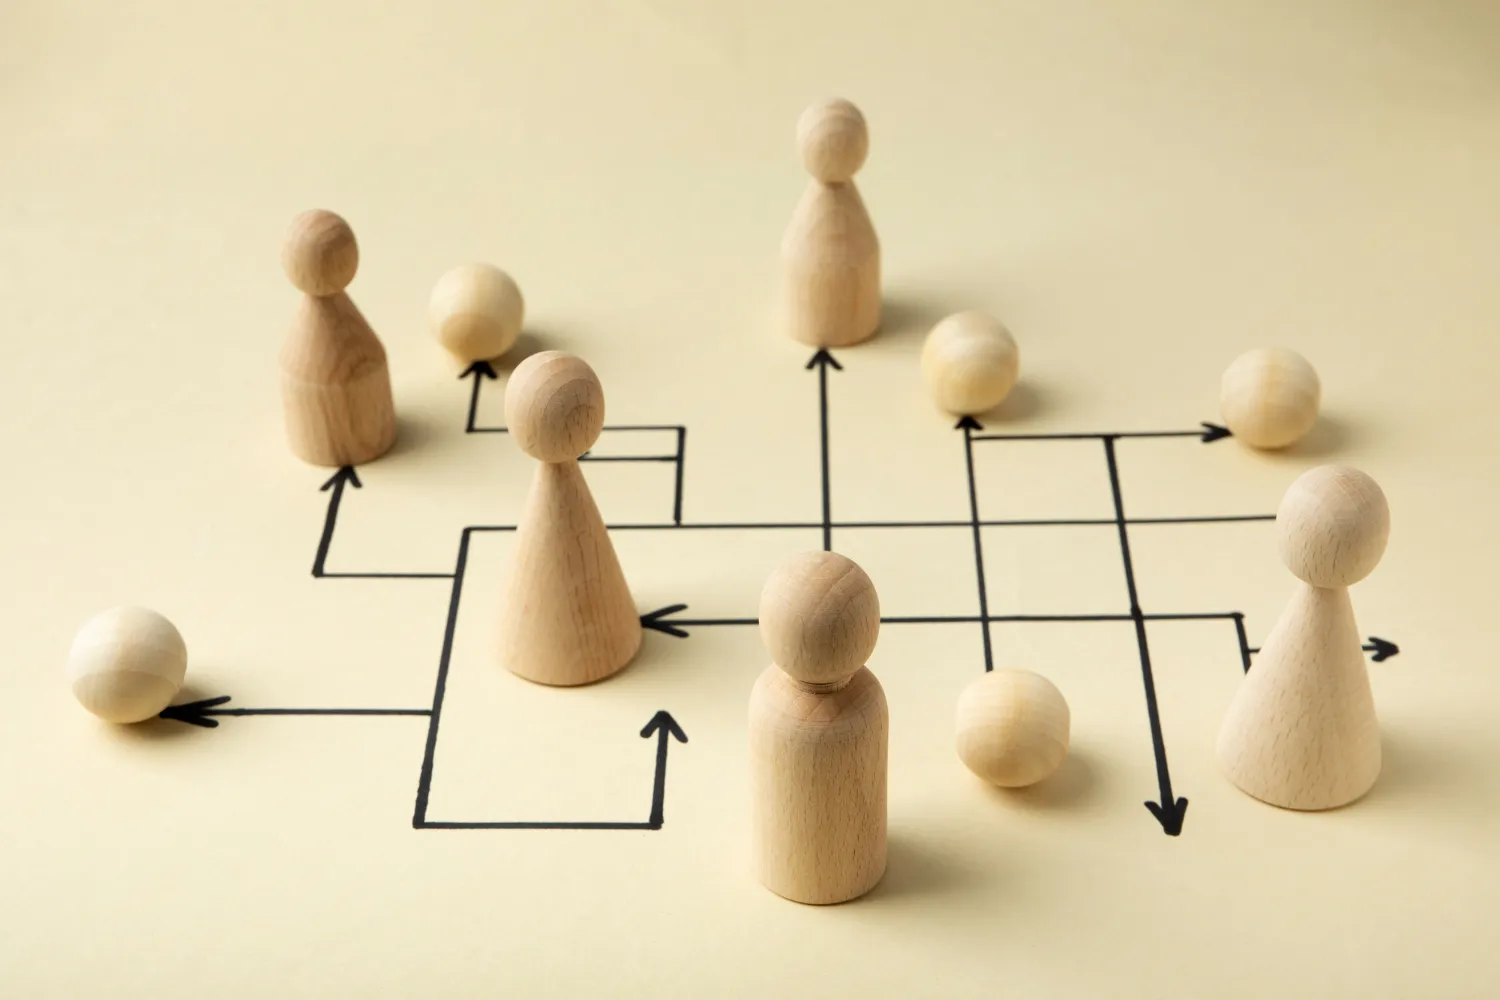 Wooden figures arranged on a diagram of arrows, symbolizing the structured and efficient flow of operations within a team, as discussed in JOH Partners' blog on optimizing organizational efficiency.